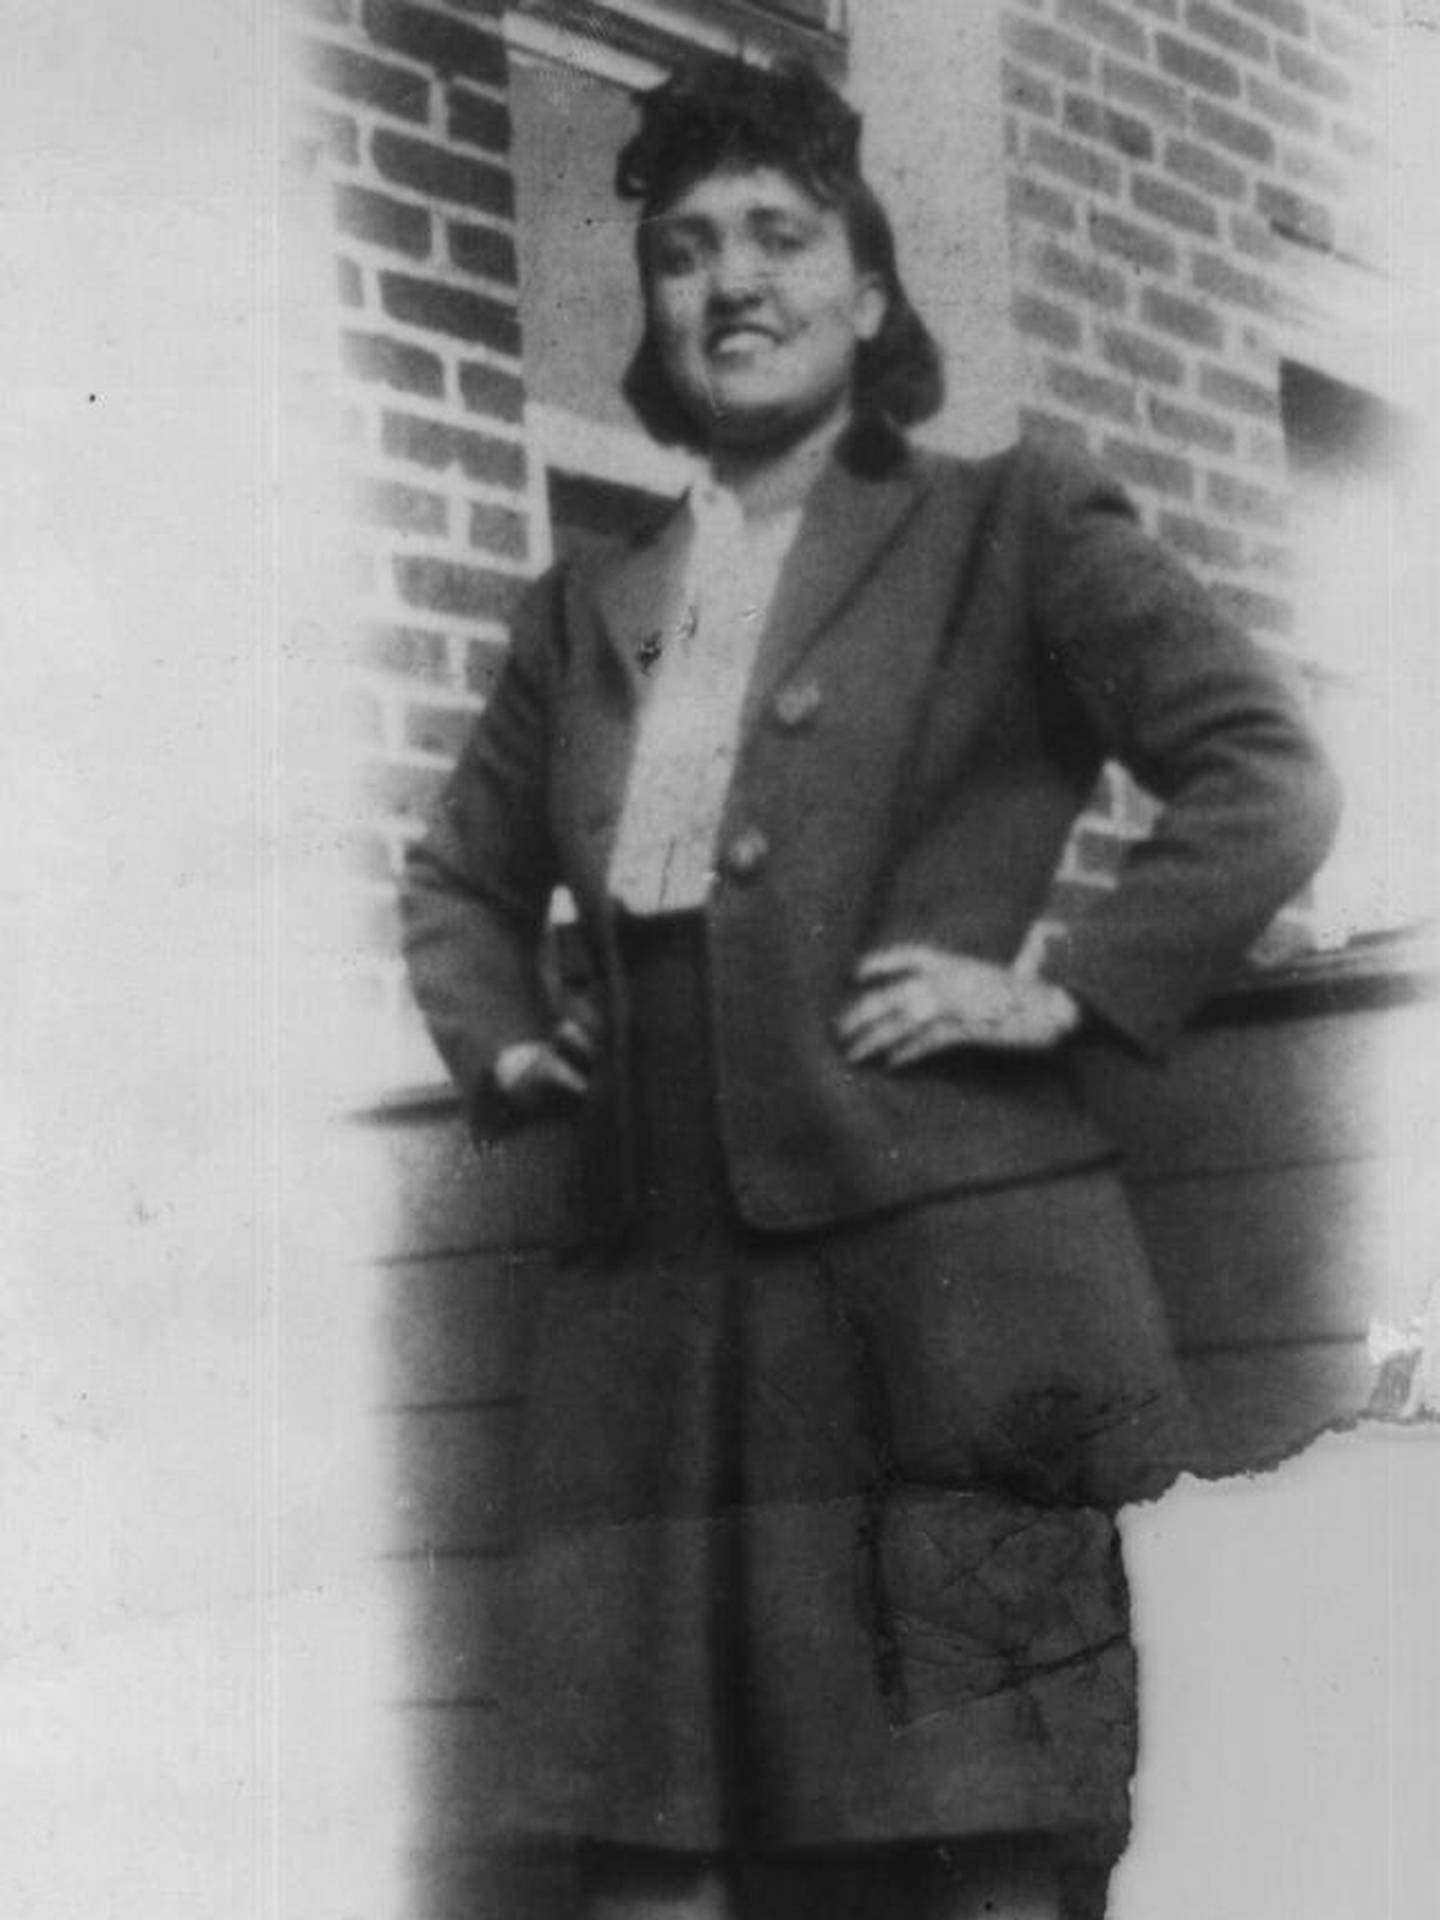 Henrietta Lacks, a 31-year-old mother of five, died of cervical cancer on 4 October 1951